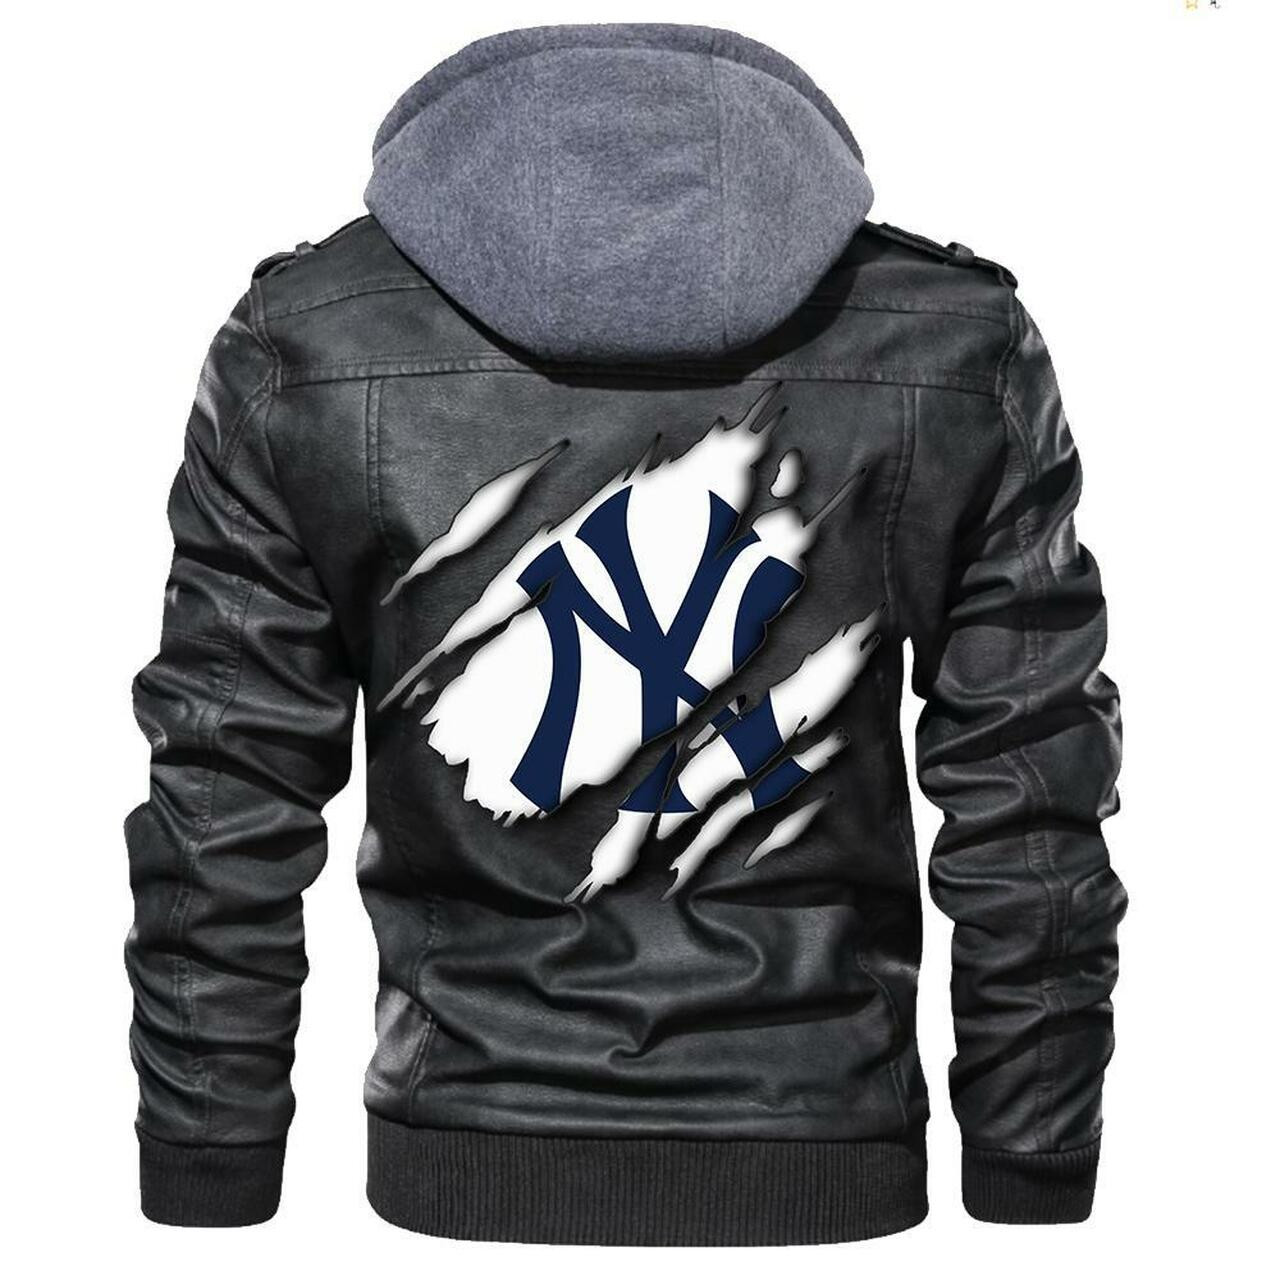 You can find Leather Jacket online at a great price 84